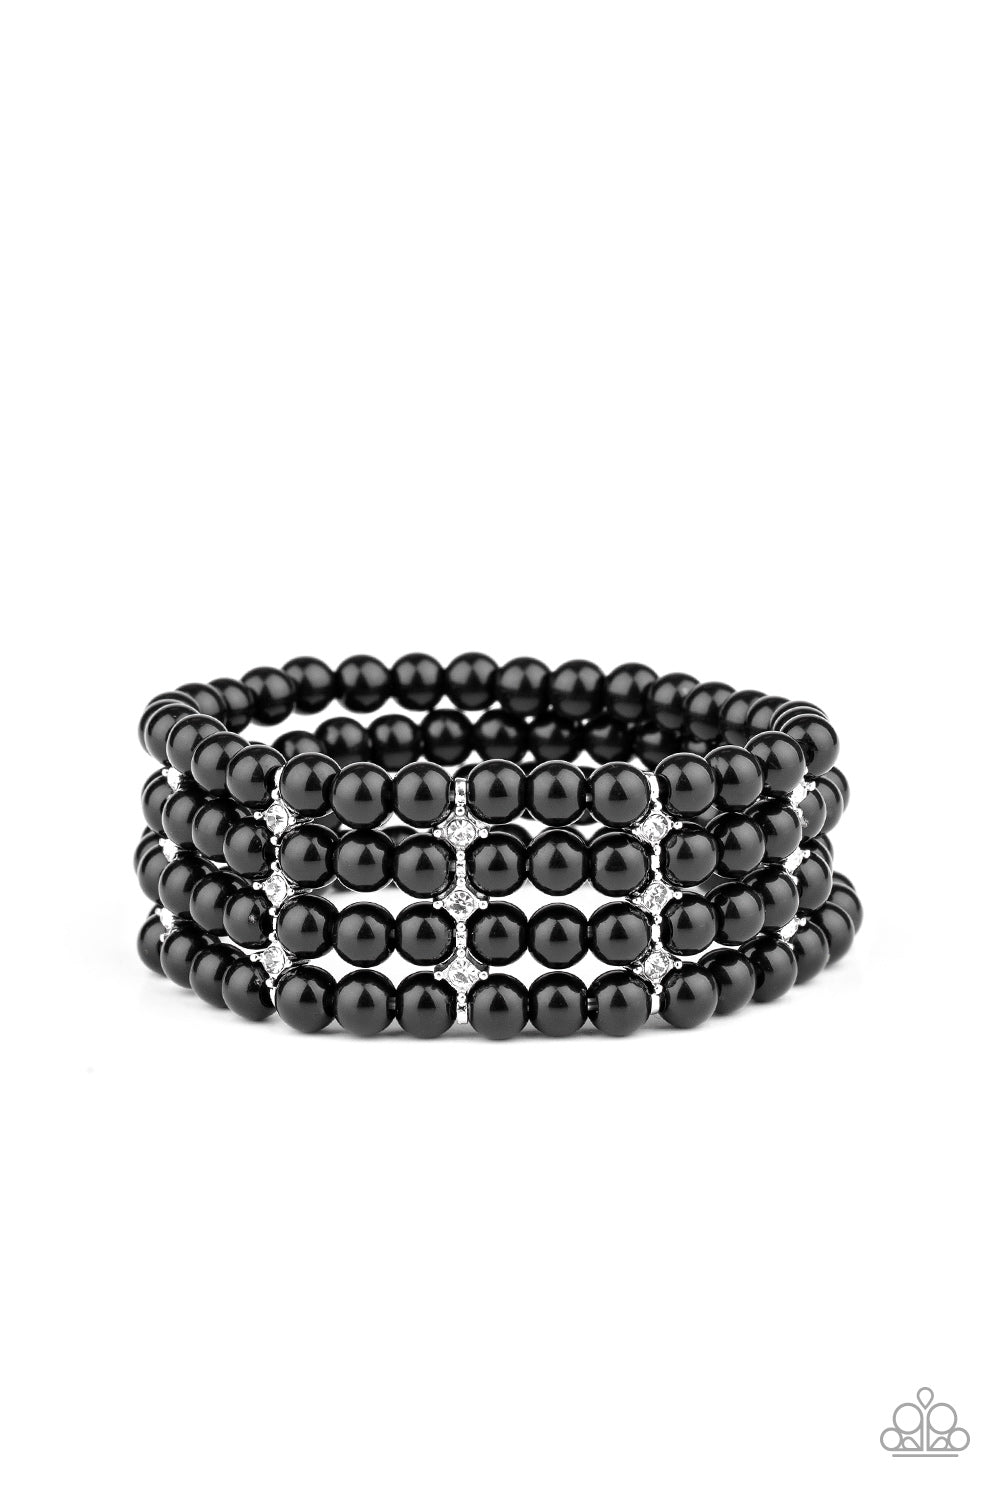 Stacked To The Top Black Bracelet - Paparazzi Accessories